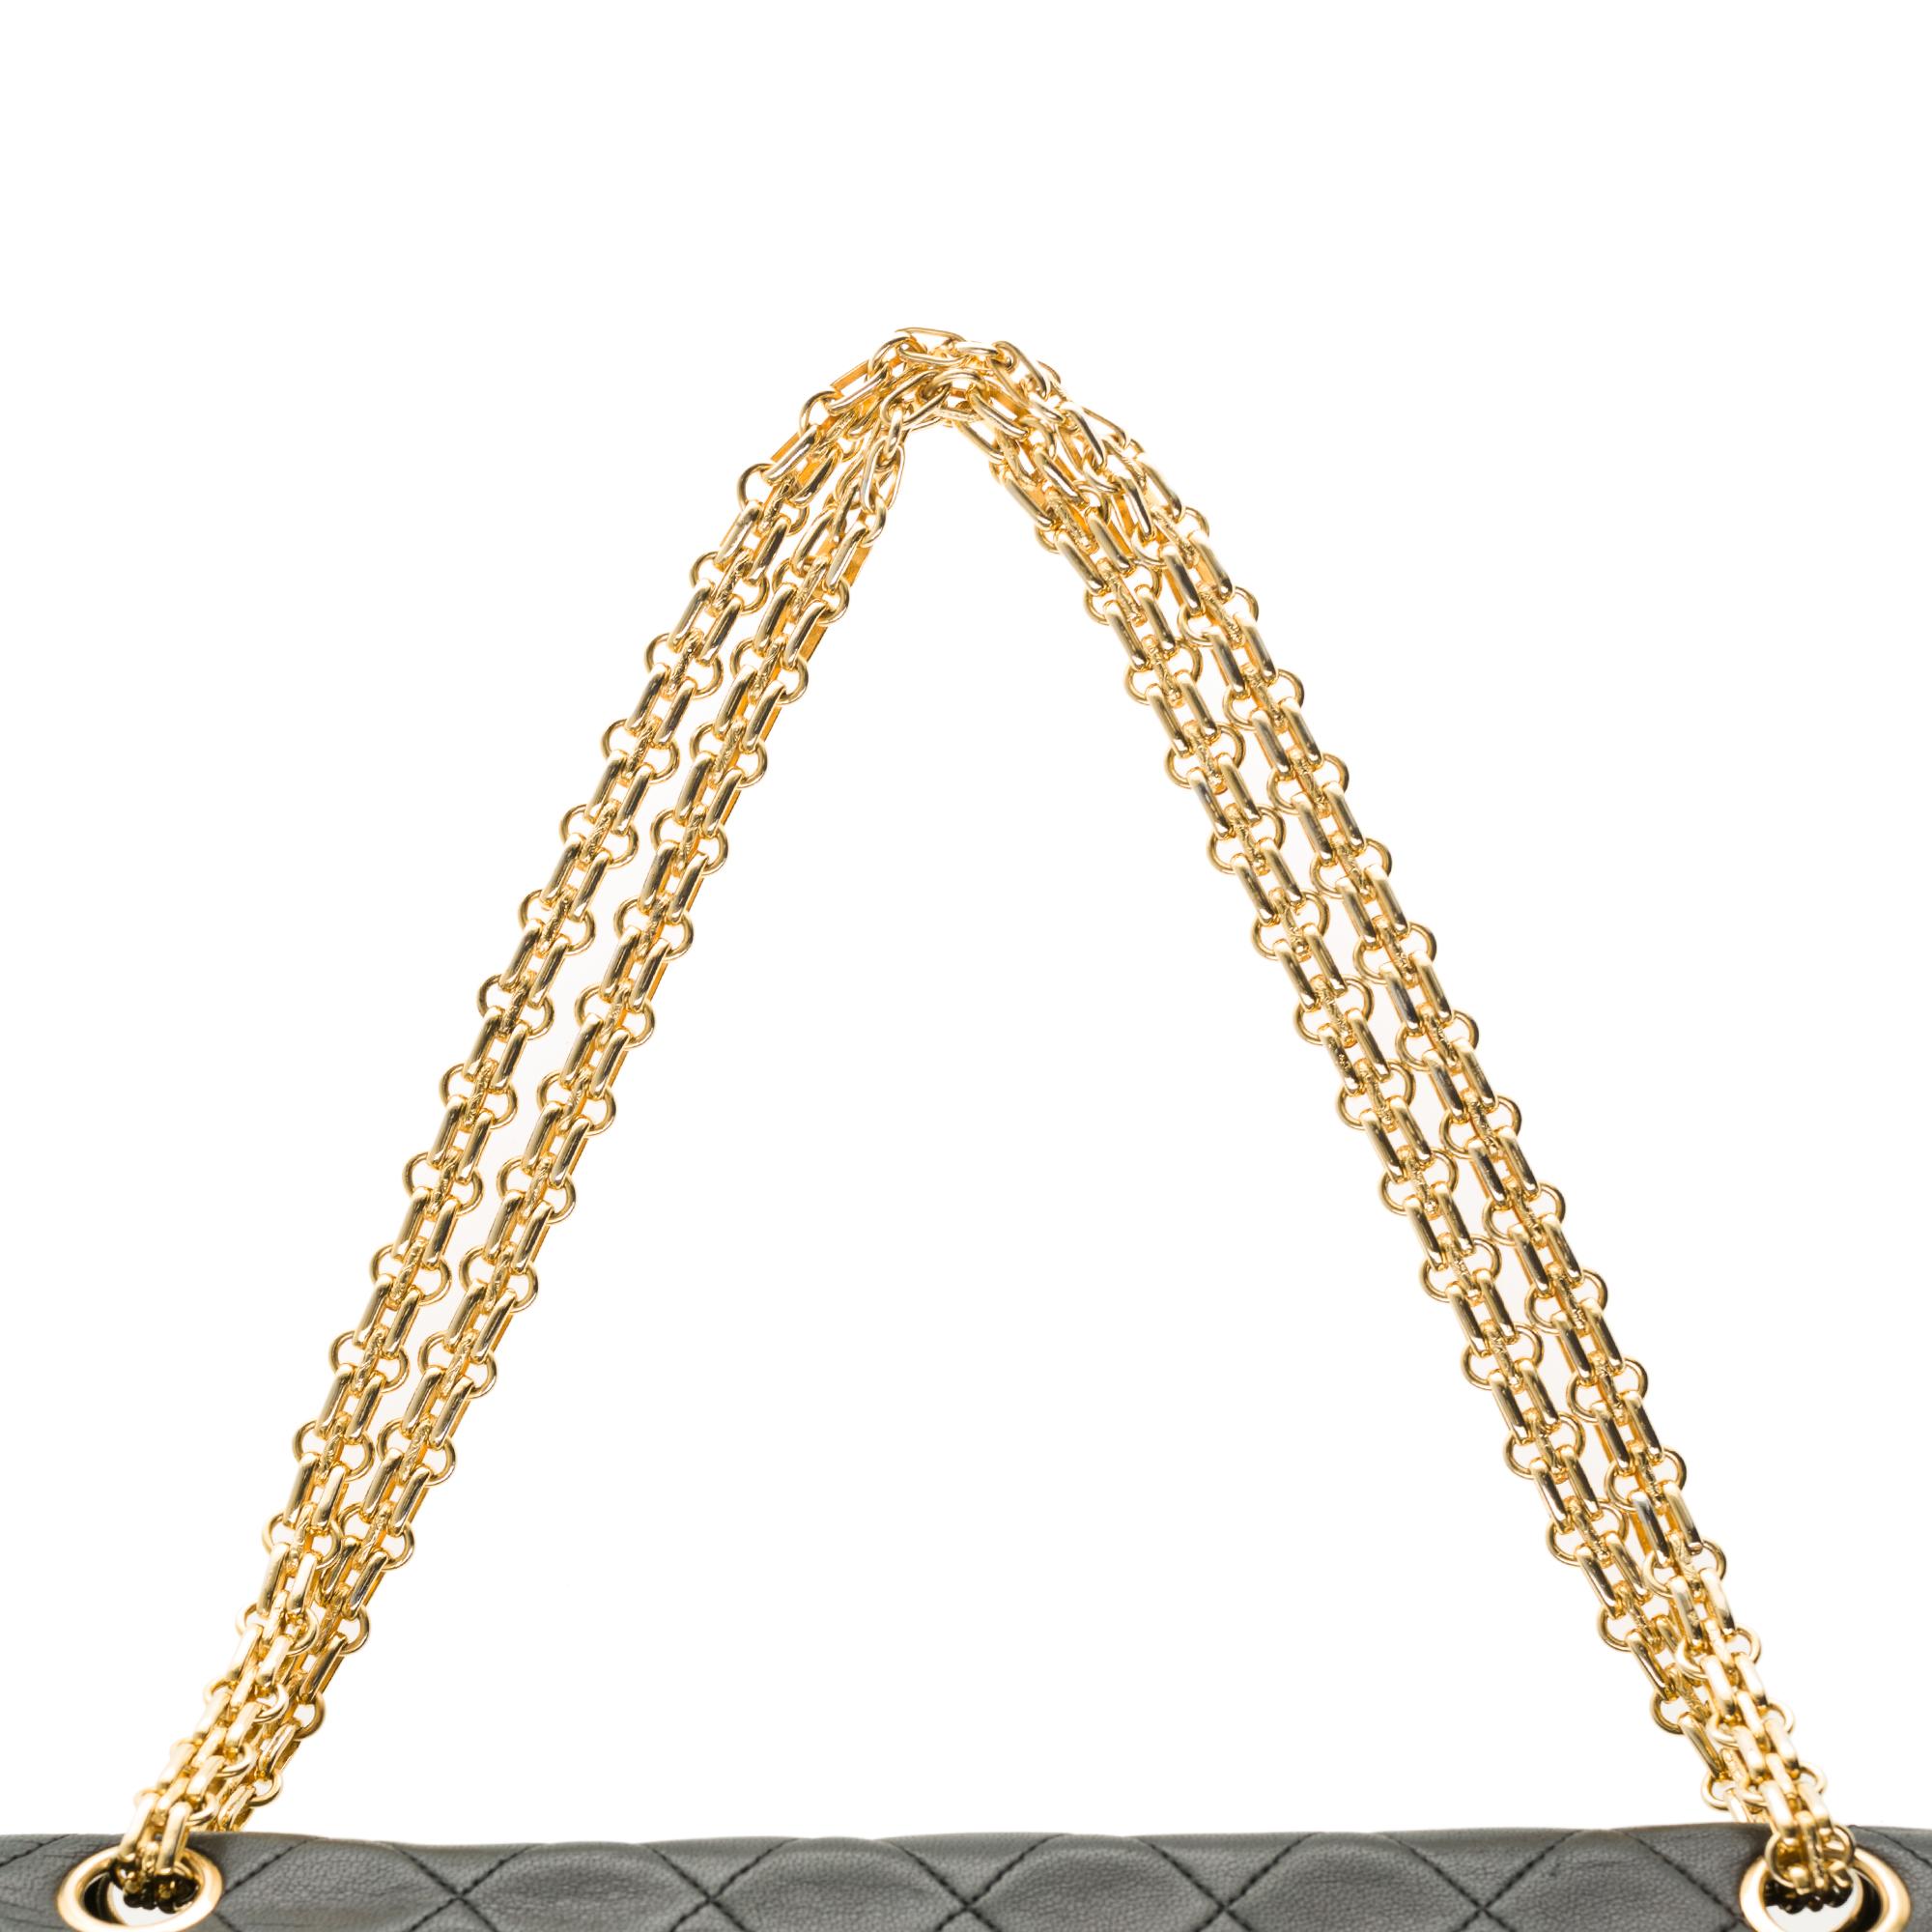 Stunning Chanel Classic shoulder bag in black quilted lambskin and gold hardware 2